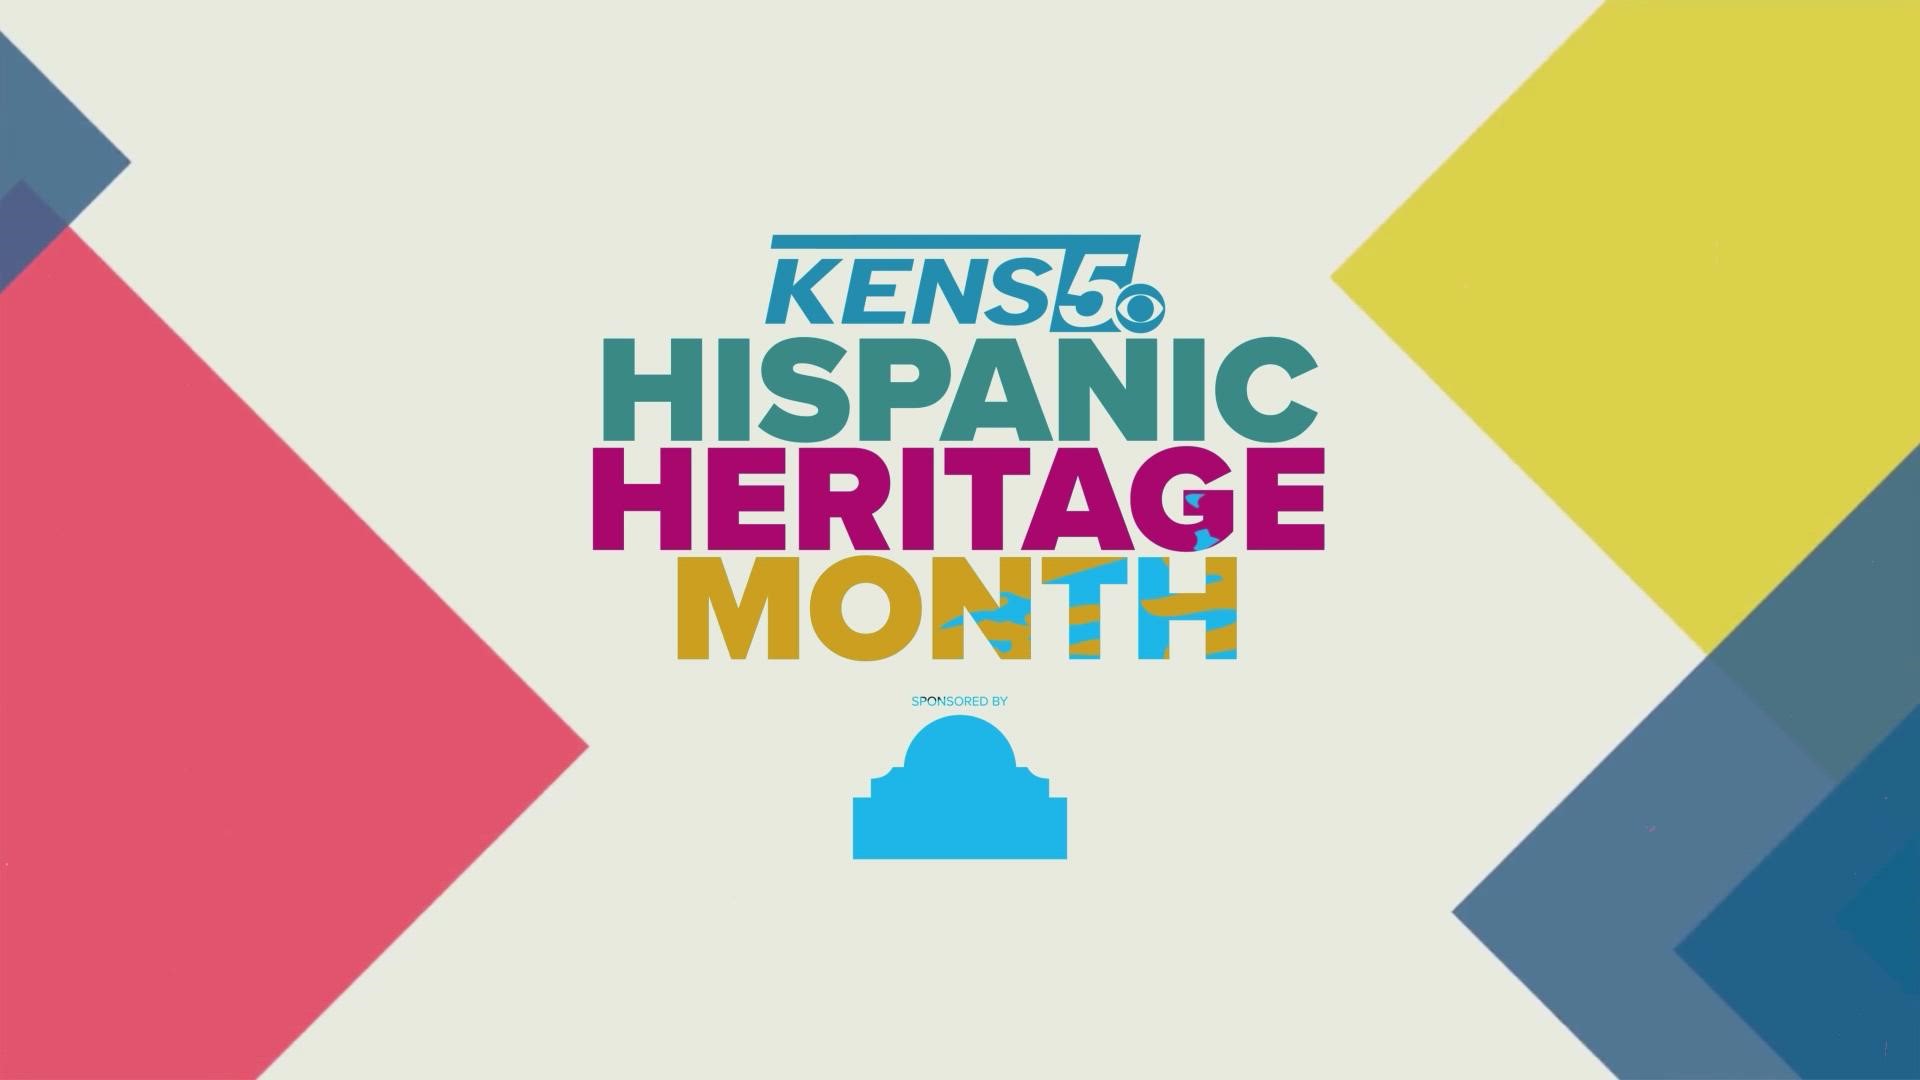 Here are some things you can do during Hispanic Heritage Month to celebrate!